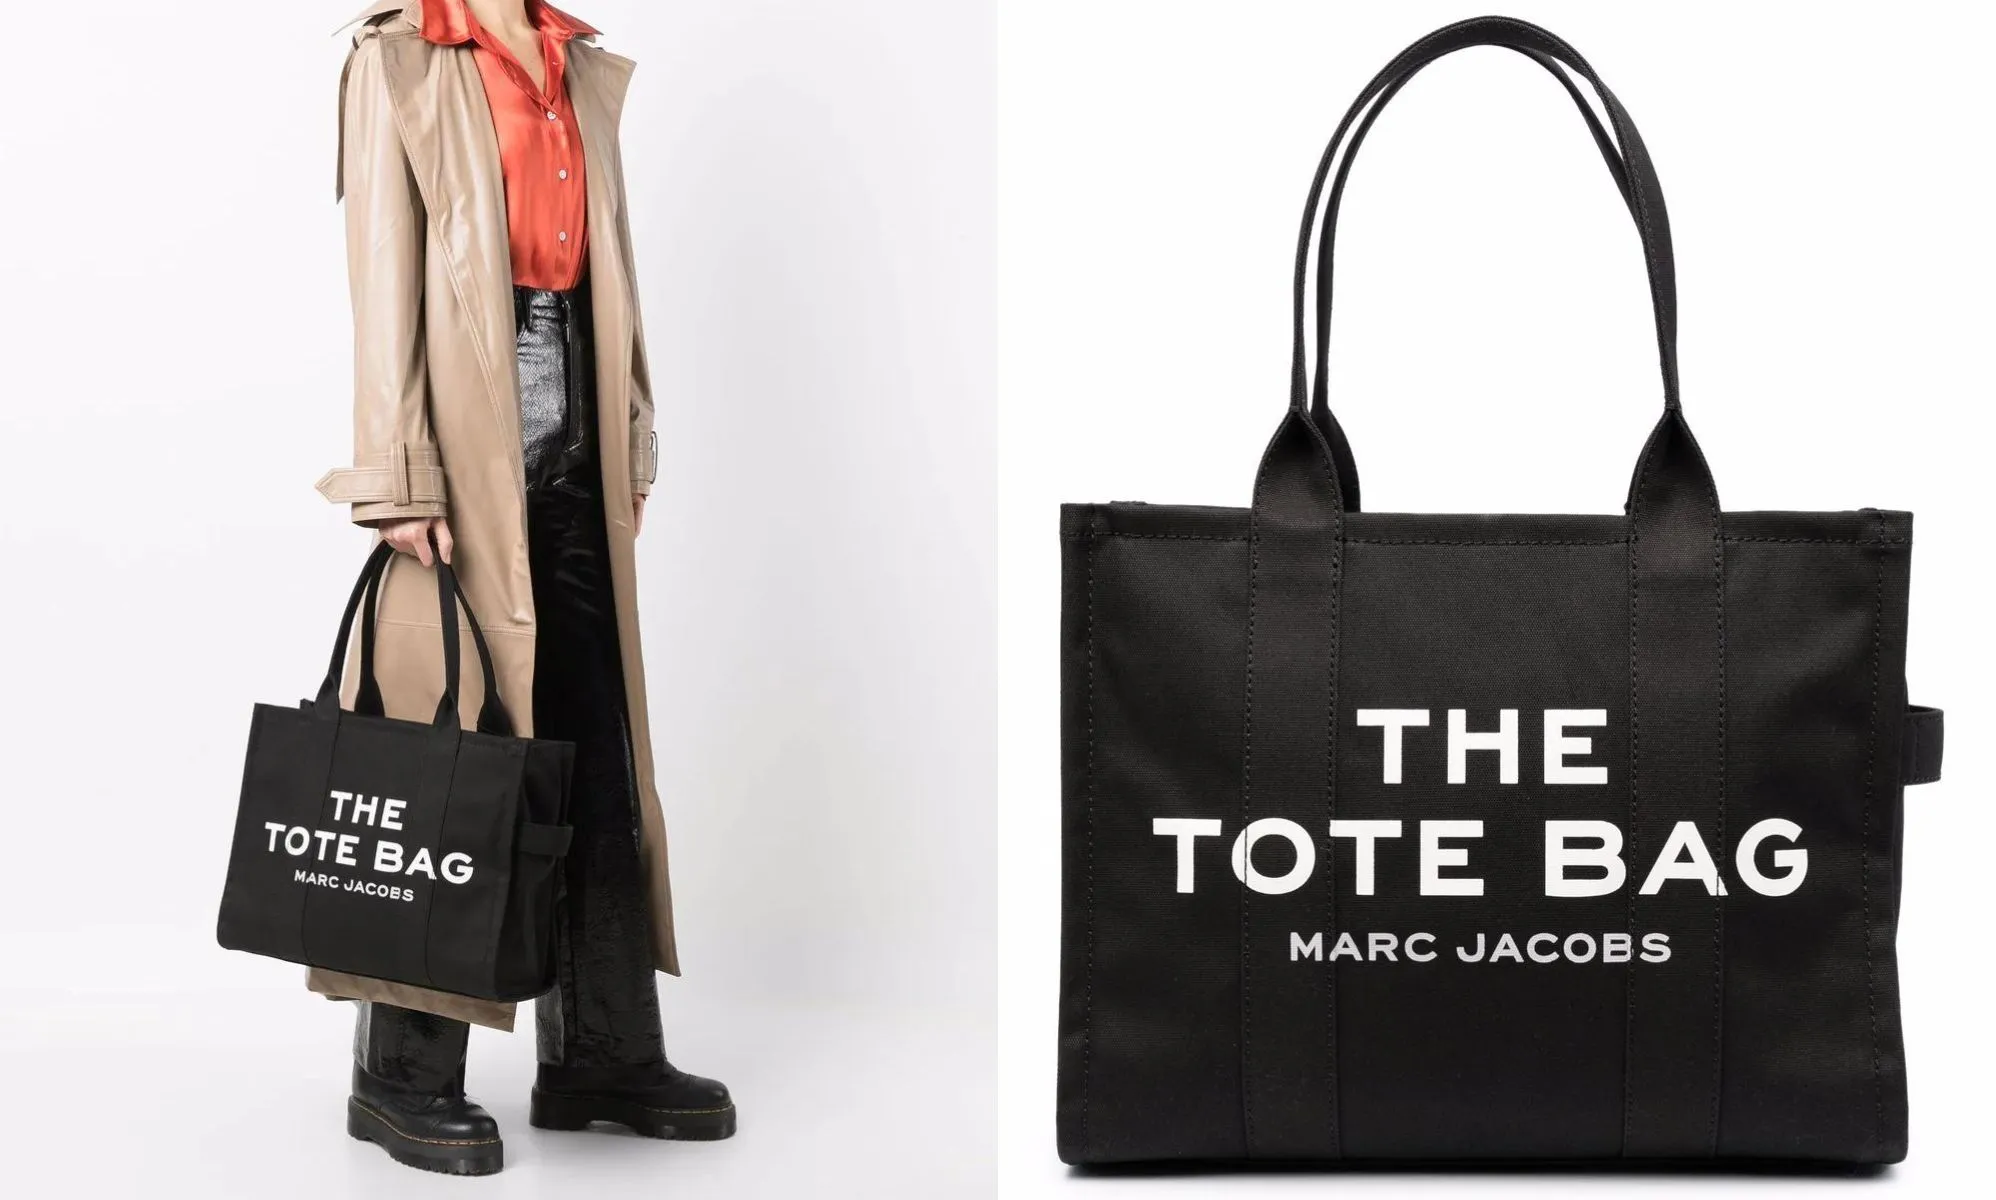 Marc Jacobs Tote Bag: the best deals on the viral bag